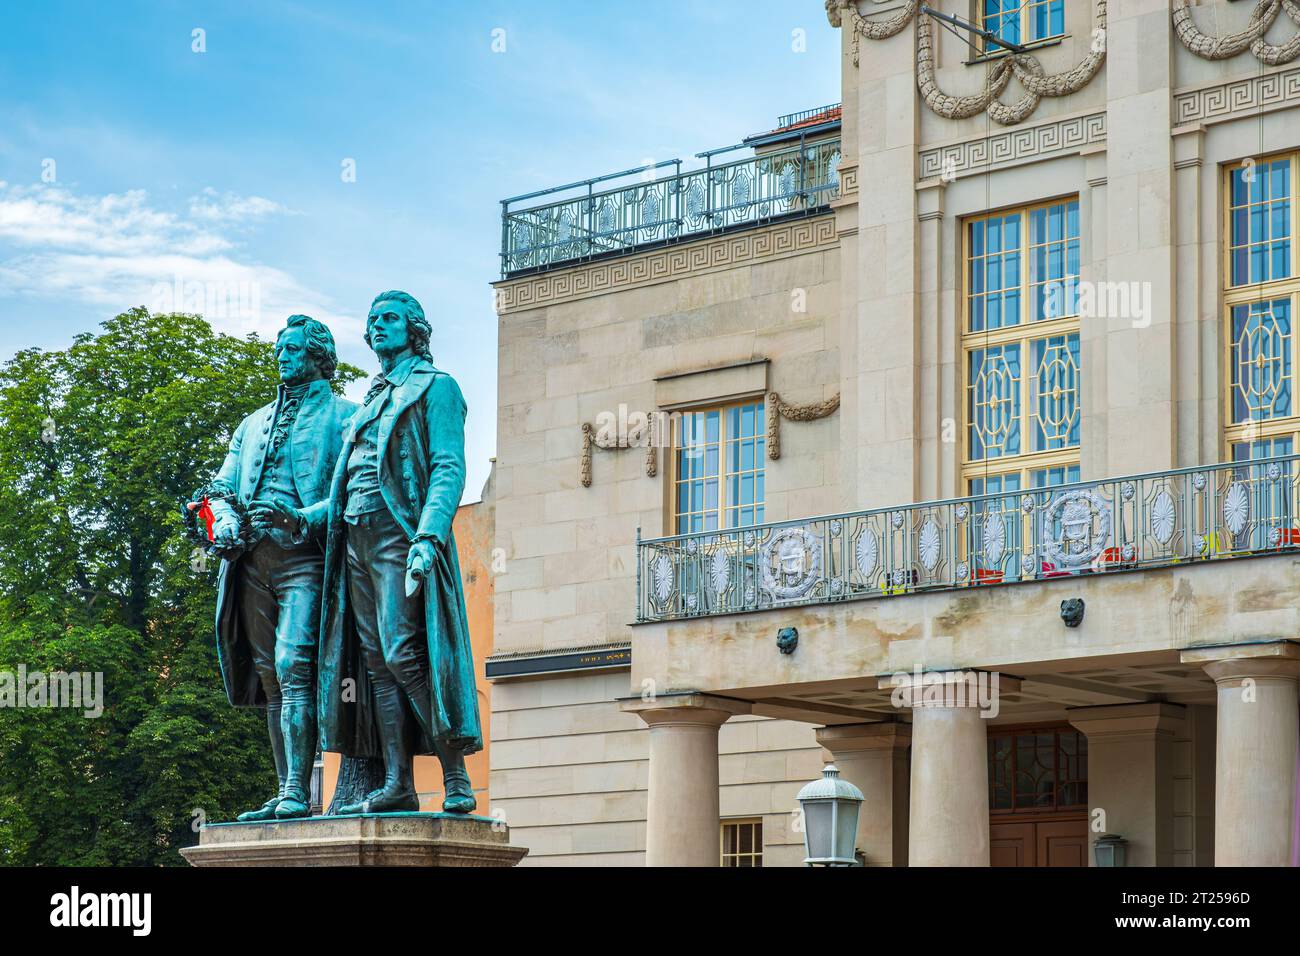 Goethe-Schiller Monument, bronze statue by Ernst Rietschel unveiled in 1857, on Theatre Square in Weimar, Thuringia, Germany. Stock Photo